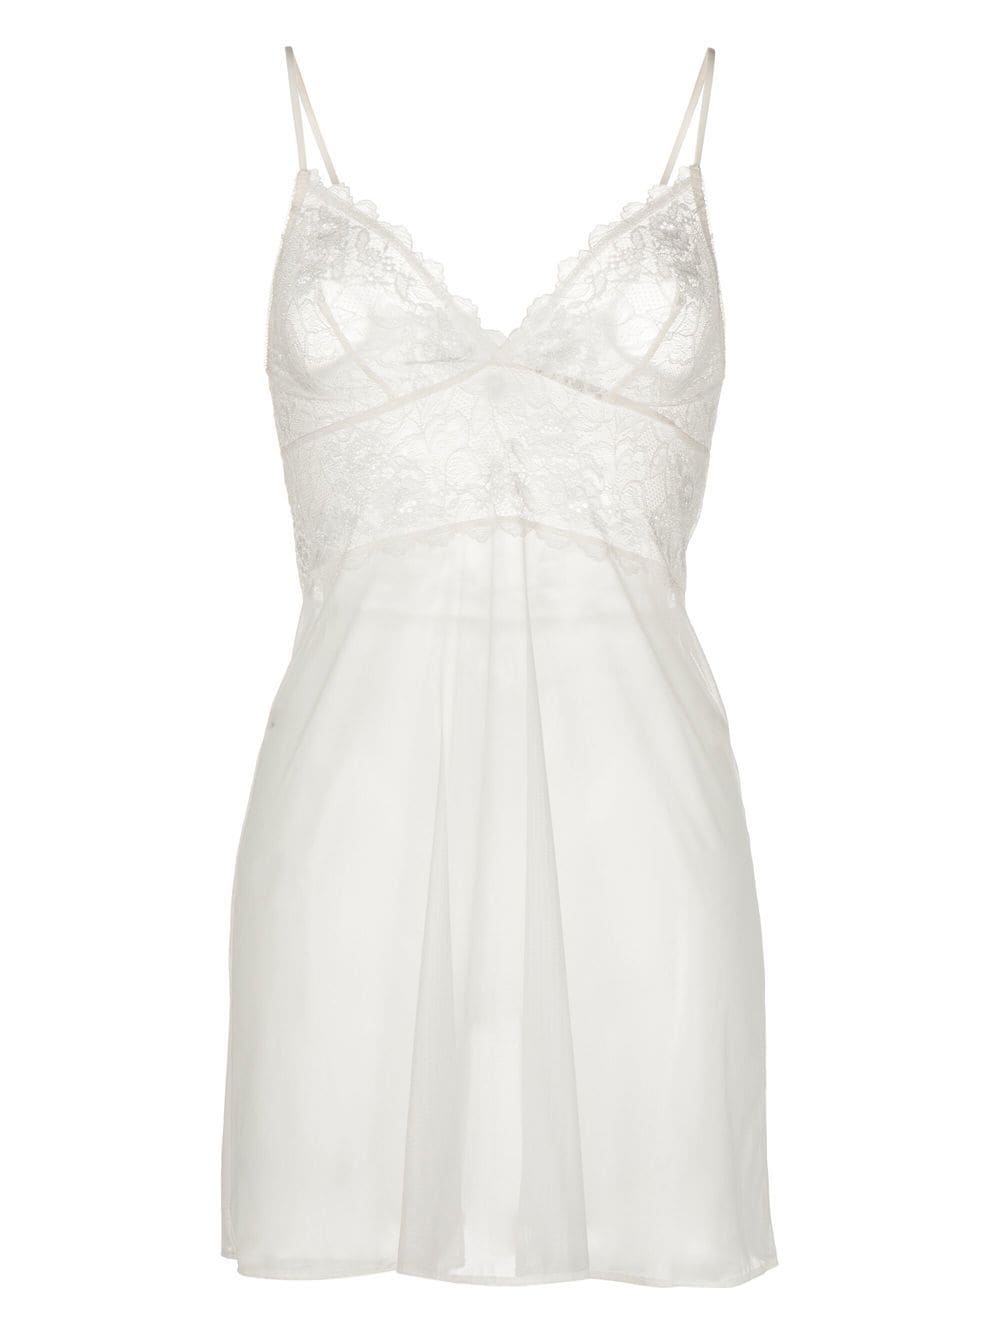 Wacoal Lace Perfection Chemise - Farfetch